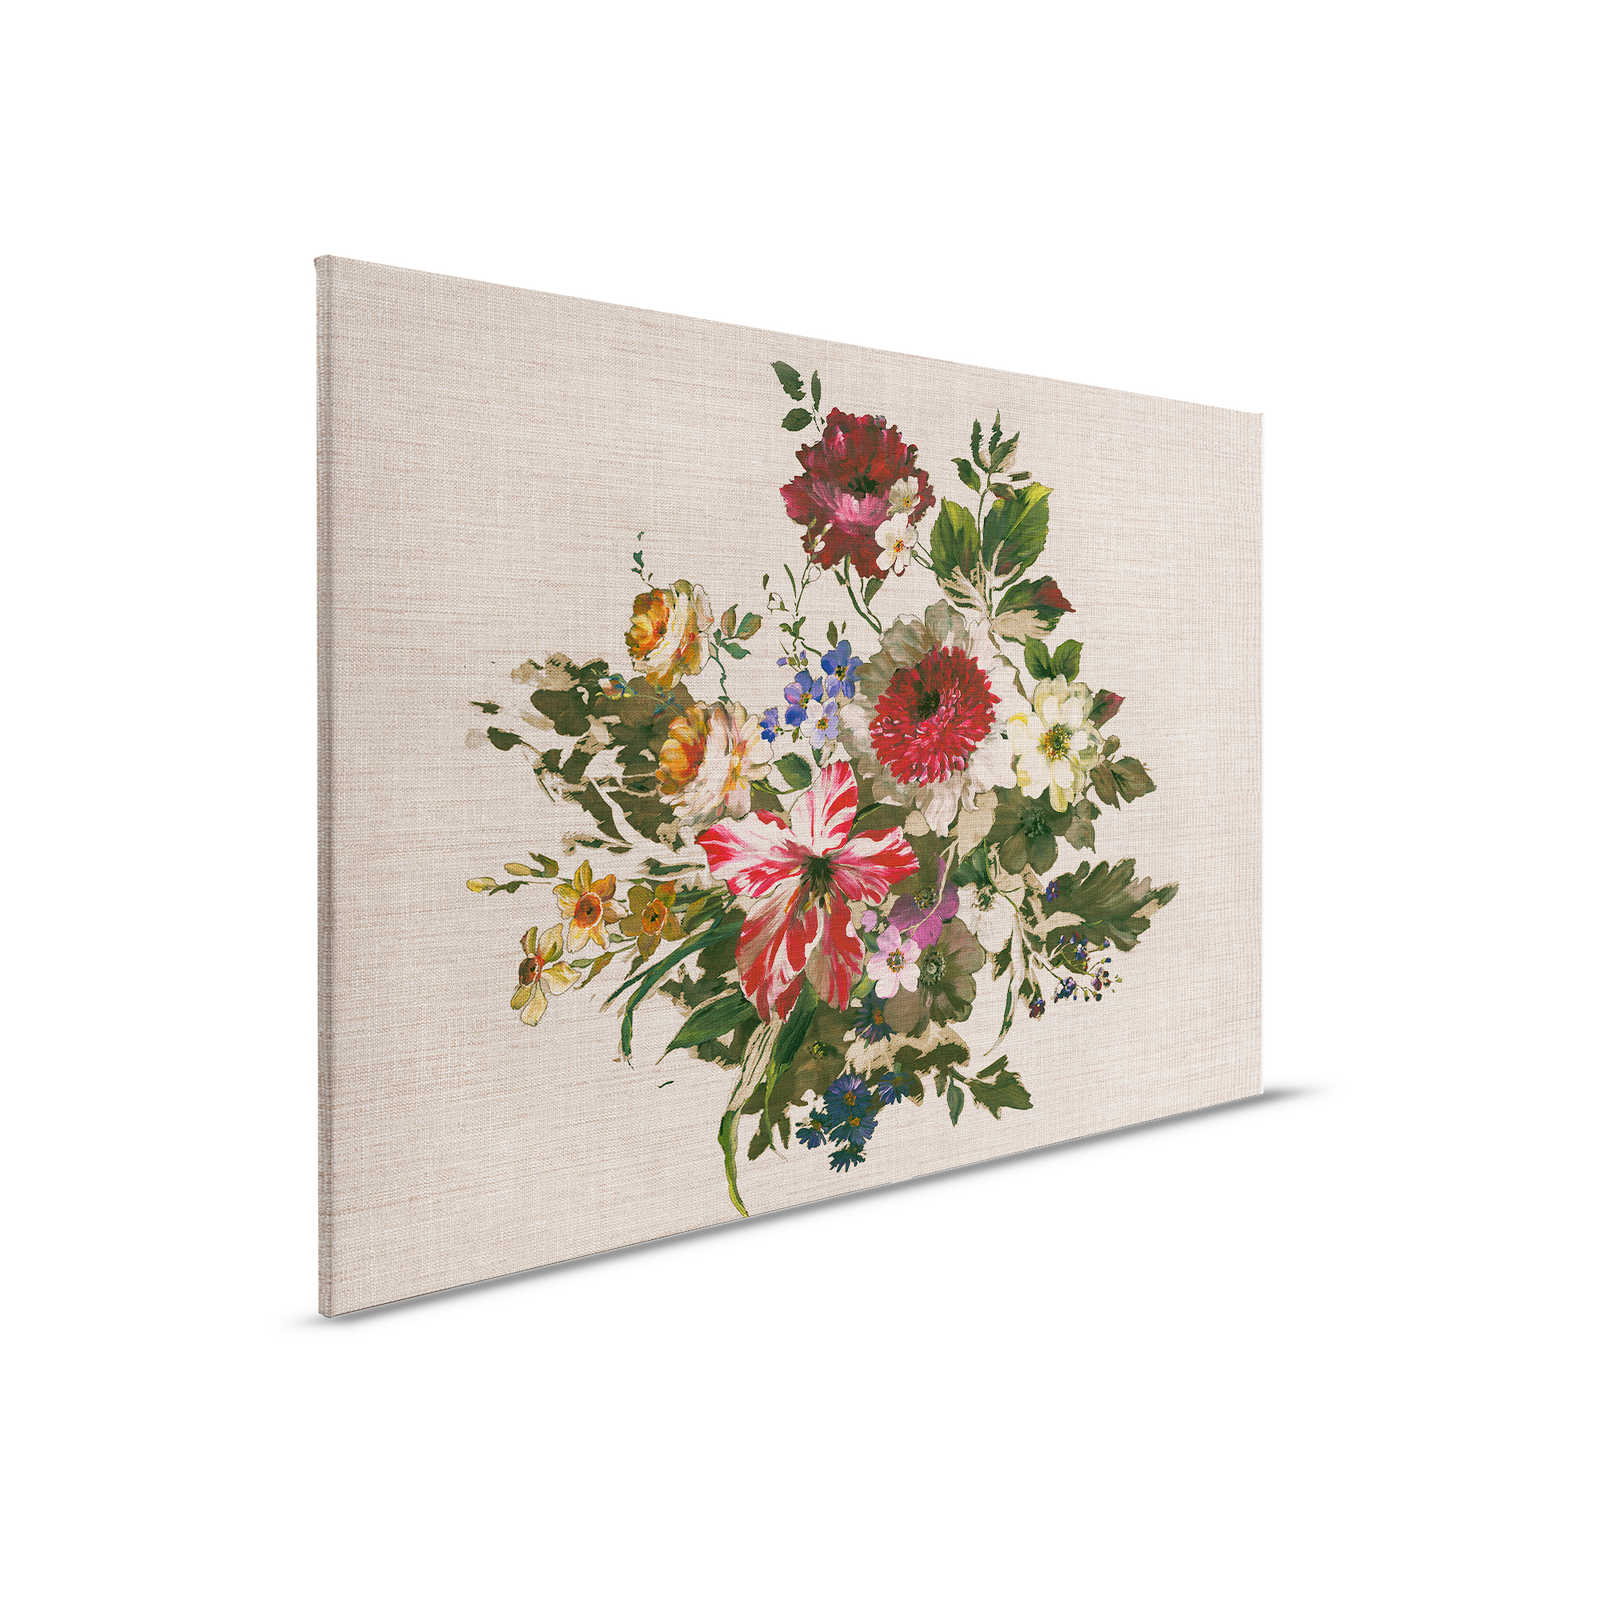 Canvas painting painted flowers vintage style & linen look - 0.90 m x 0.60 m
